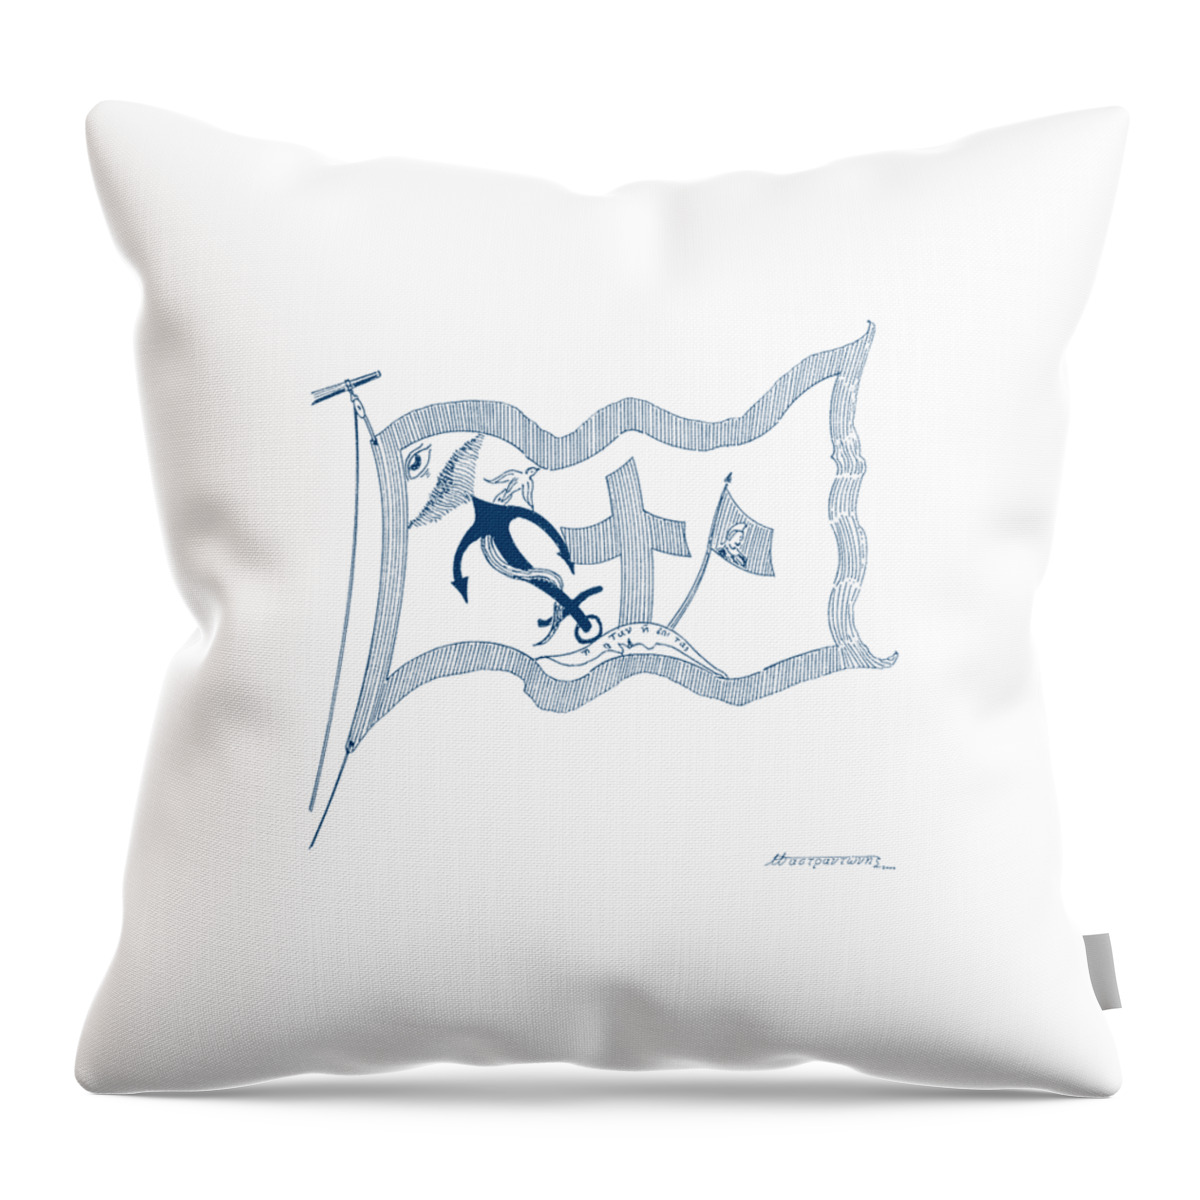 Sailing Vessels Throw Pillow featuring the drawing The Revolutionary Flag of Hydra by Panagiotis Mastrantonis